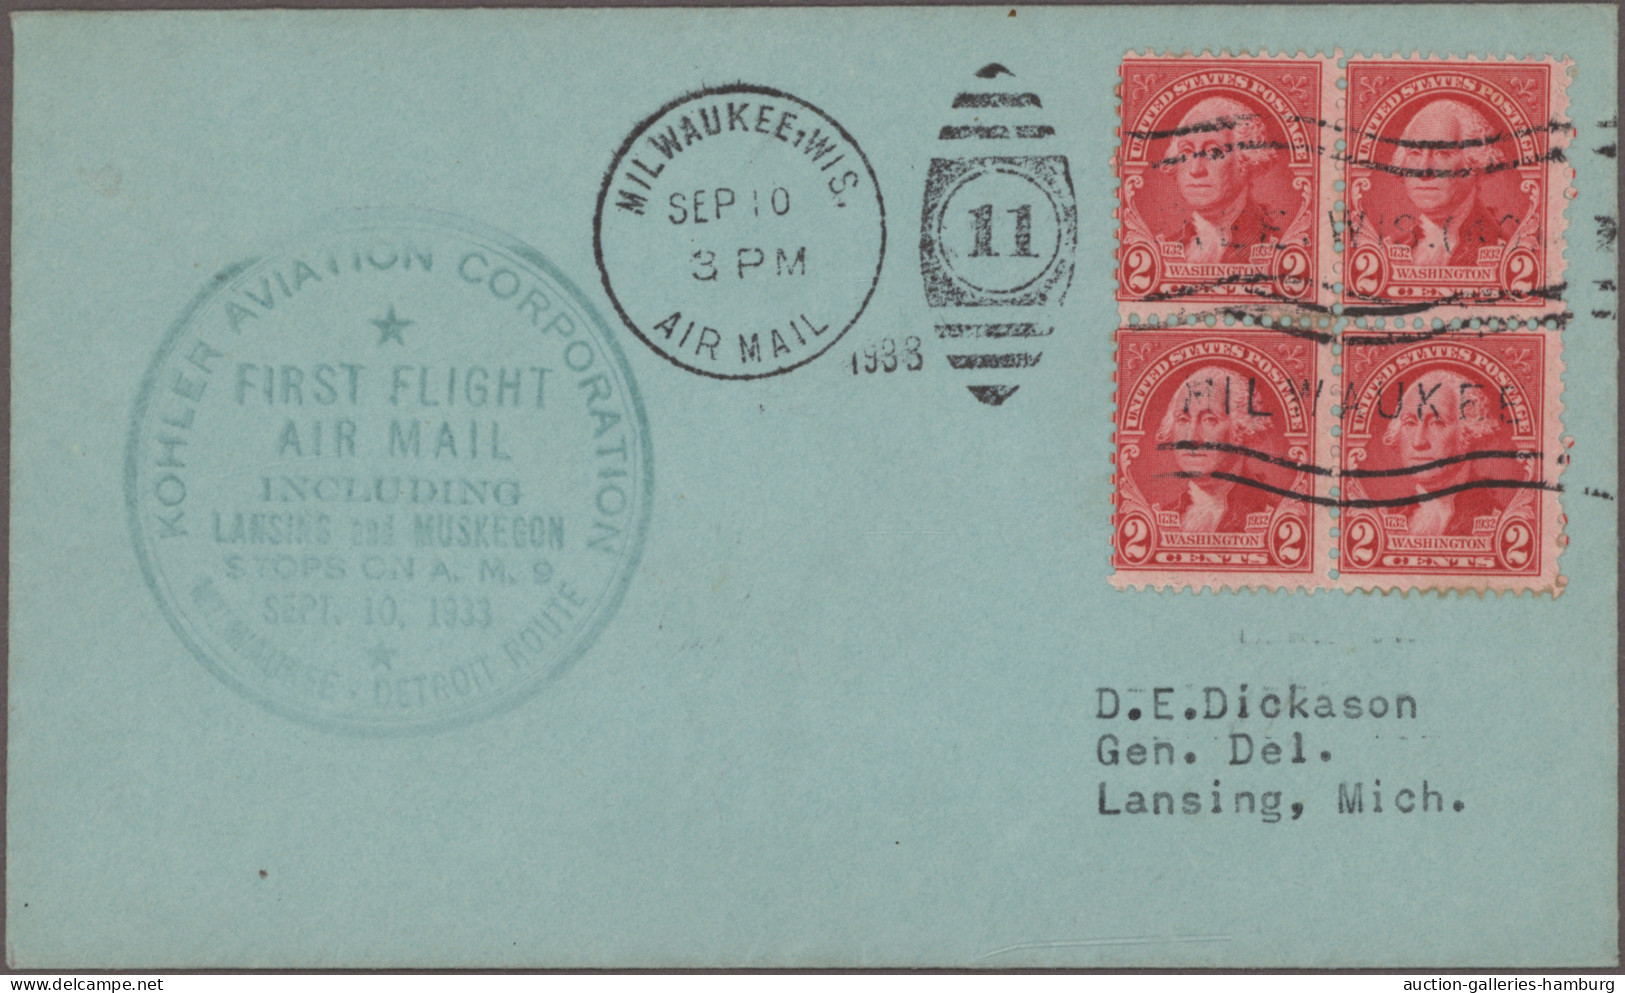 United States: 1929/1990 (ca.), AIRMAIL, collection of apprx. 164 covers, compri